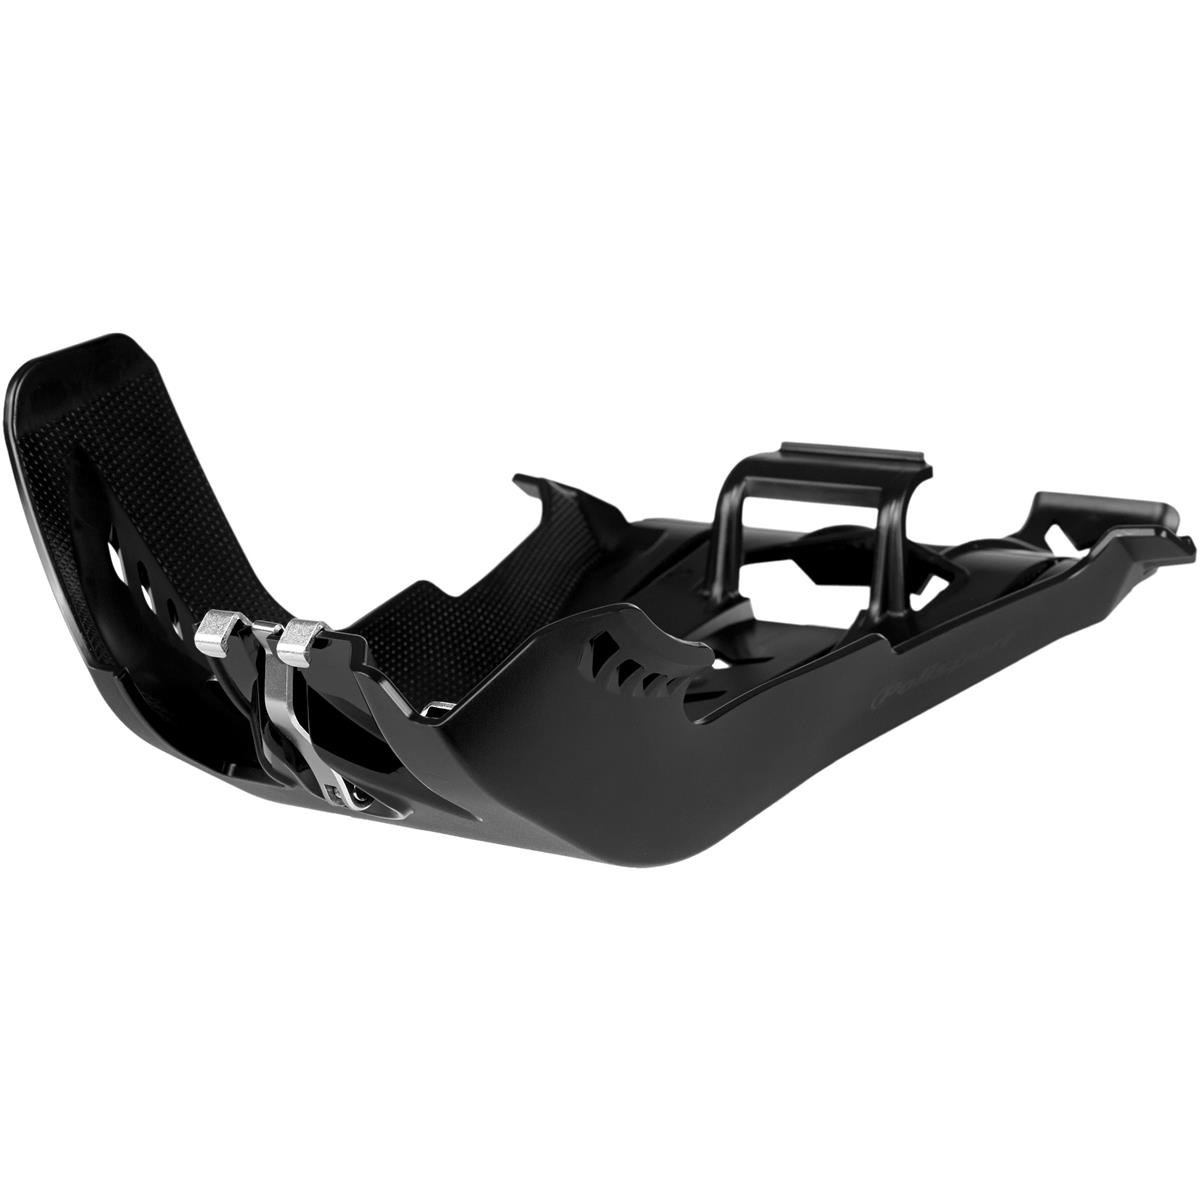 Polisport Skid plate with deflection protection Fortress Beta RR 250/300 '20, Black